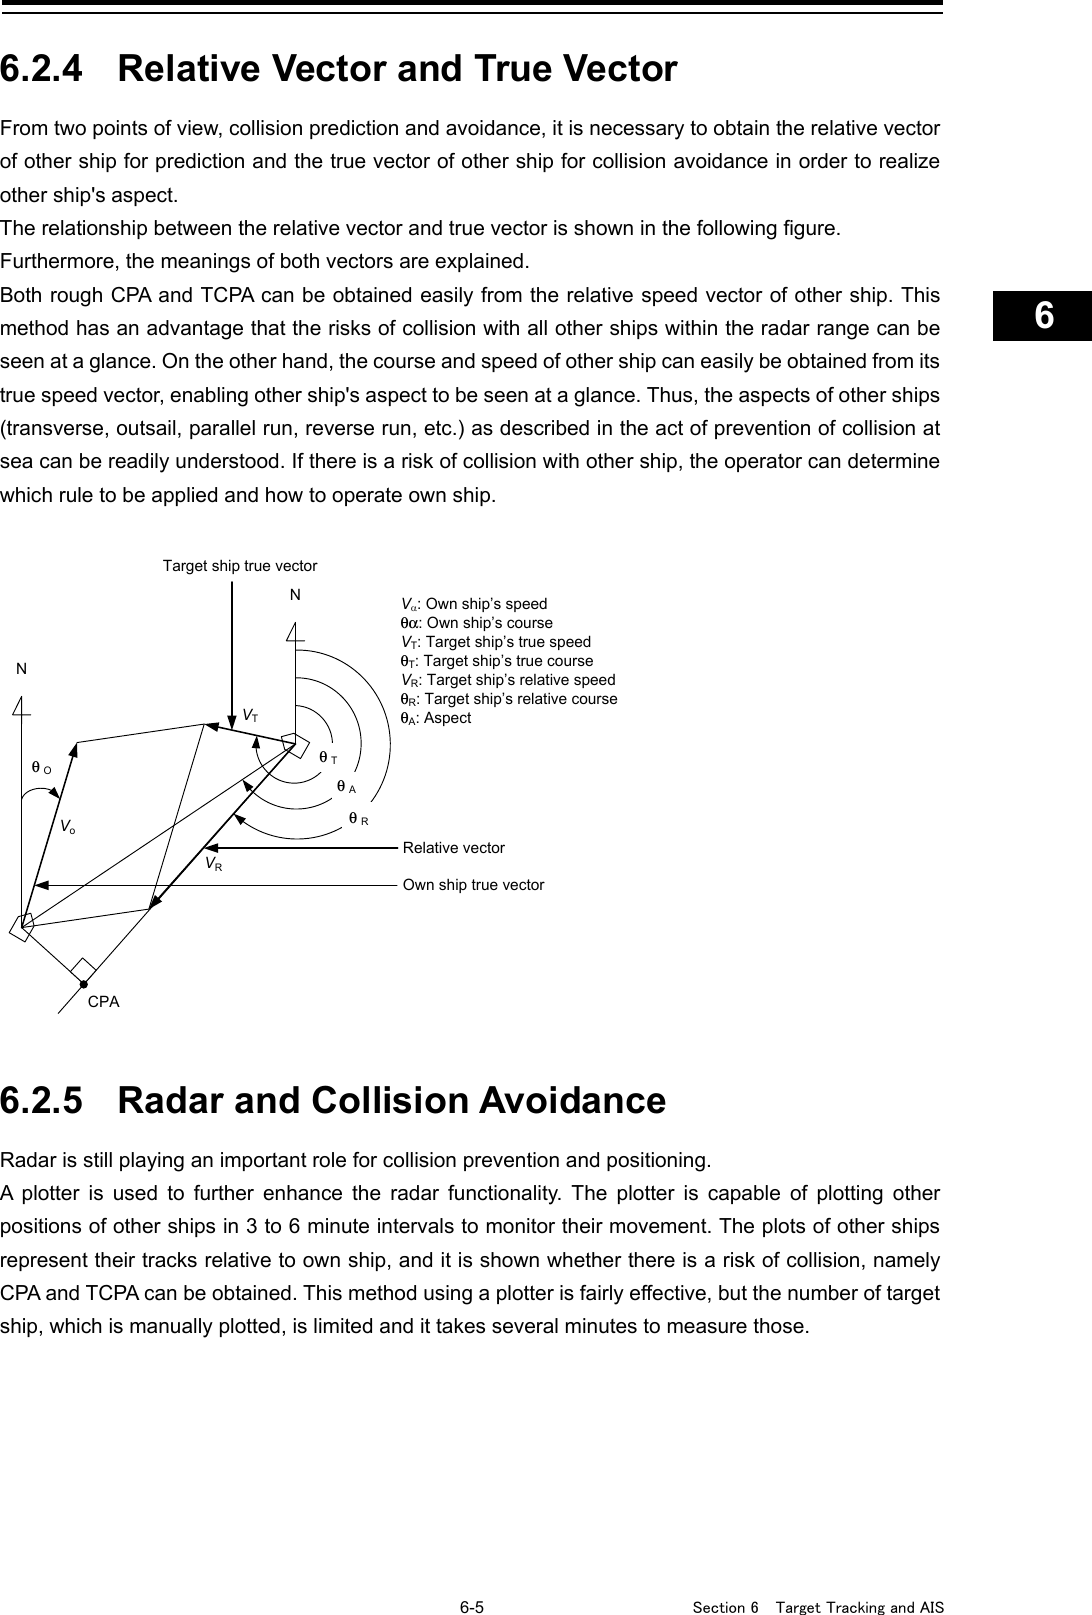   6-5  Section 6  Target Tracking and AIS    1  2  3  4  5  6  7  8  9  10  11  12  13  14  15  16  17  18  19  20  21  22  23  24  25  26  27      6.2.4 Relative Vector and True Vector From two points of view, collision prediction and avoidance, it is necessary to obtain the relative vector of other ship for prediction and the true vector of other ship for collision avoidance in order to realize other ship&apos;s aspect. The relationship between the relative vector and true vector is shown in the following figure. Furthermore, the meanings of both vectors are explained. Both rough CPA and TCPA can be obtained easily from the relative speed vector of other ship. This method has an advantage that the risks of collision with all other ships within the radar range can be seen at a glance. On the other hand, the course and speed of other ship can easily be obtained from its true speed vector, enabling other ship&apos;s aspect to be seen at a glance. Thus, the aspects of other ships (transverse, outsail, parallel run, reverse run, etc.) as described in the act of prevention of collision at sea can be readily understood. If there is a risk of collision with other ship, the operator can determine which rule to be applied and how to operate own ship.     6.2.5 Radar and Collision Avoidance Radar is still playing an important role for collision prevention and positioning. A plotter is used to further enhance the radar functionality. The plotter is capable of plotting other positions of other ships in 3 to 6 minute intervals to monitor their movement. The plots of other ships represent their tracks relative to own ship, and it is shown whether there is a risk of collision, namely CPA and TCPA can be obtained. This method using a plotter is fairly effective, but the number of target ship, which is manually plotted, is limited and it takes several minutes to measure those.     θ Tθ Rθ Aθ OVoVRVTVα: Own ship’s speedθα: Own ship’s courseVT: Target ship’s true speedθT: Target ship’s true courseVR: Target ship’s relative speedθR: Target ship’s relative courseθA: AspectNNCPARelative vectorOwn ship true vectorTarget ship true vector